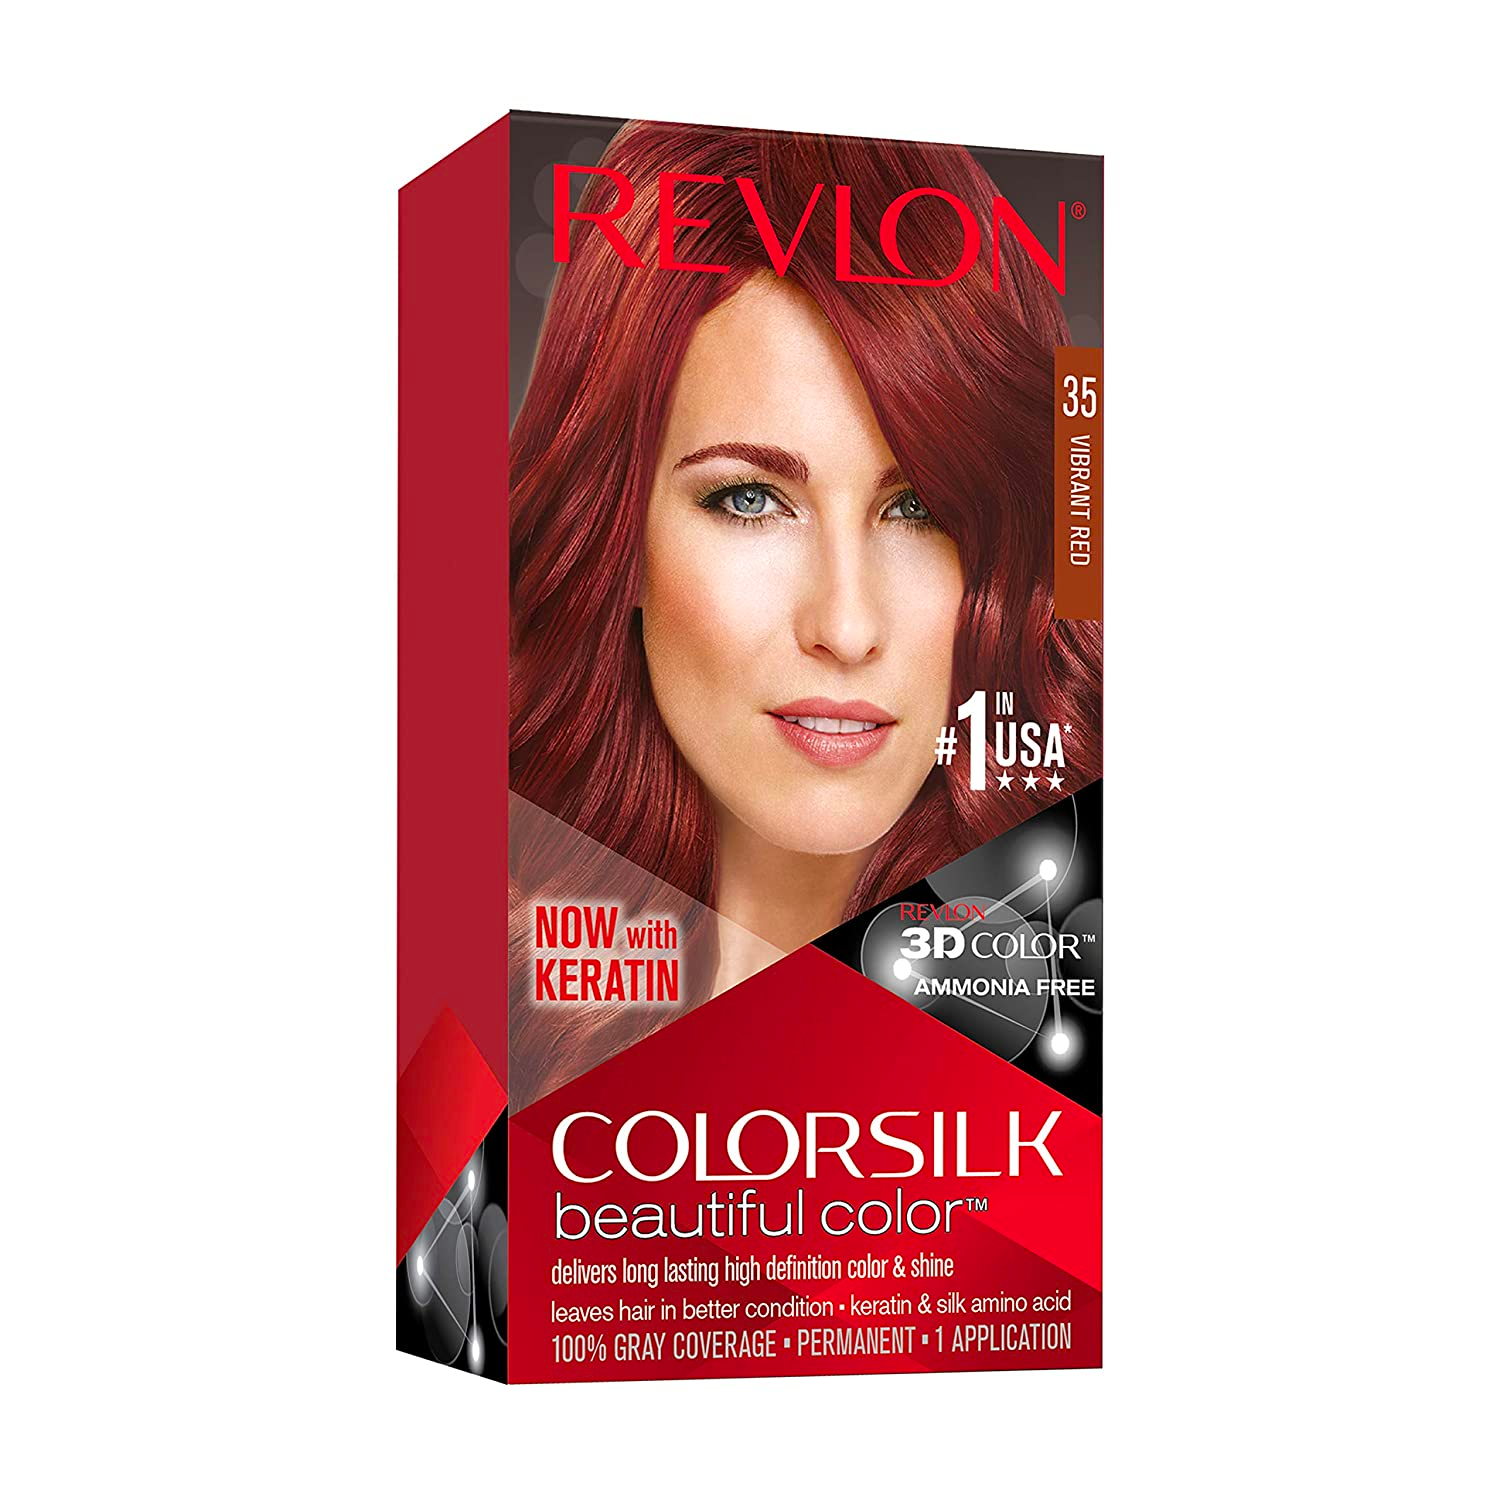 17 Best At-Home Hair Colors Brands and Kits, Reviewed for 2023